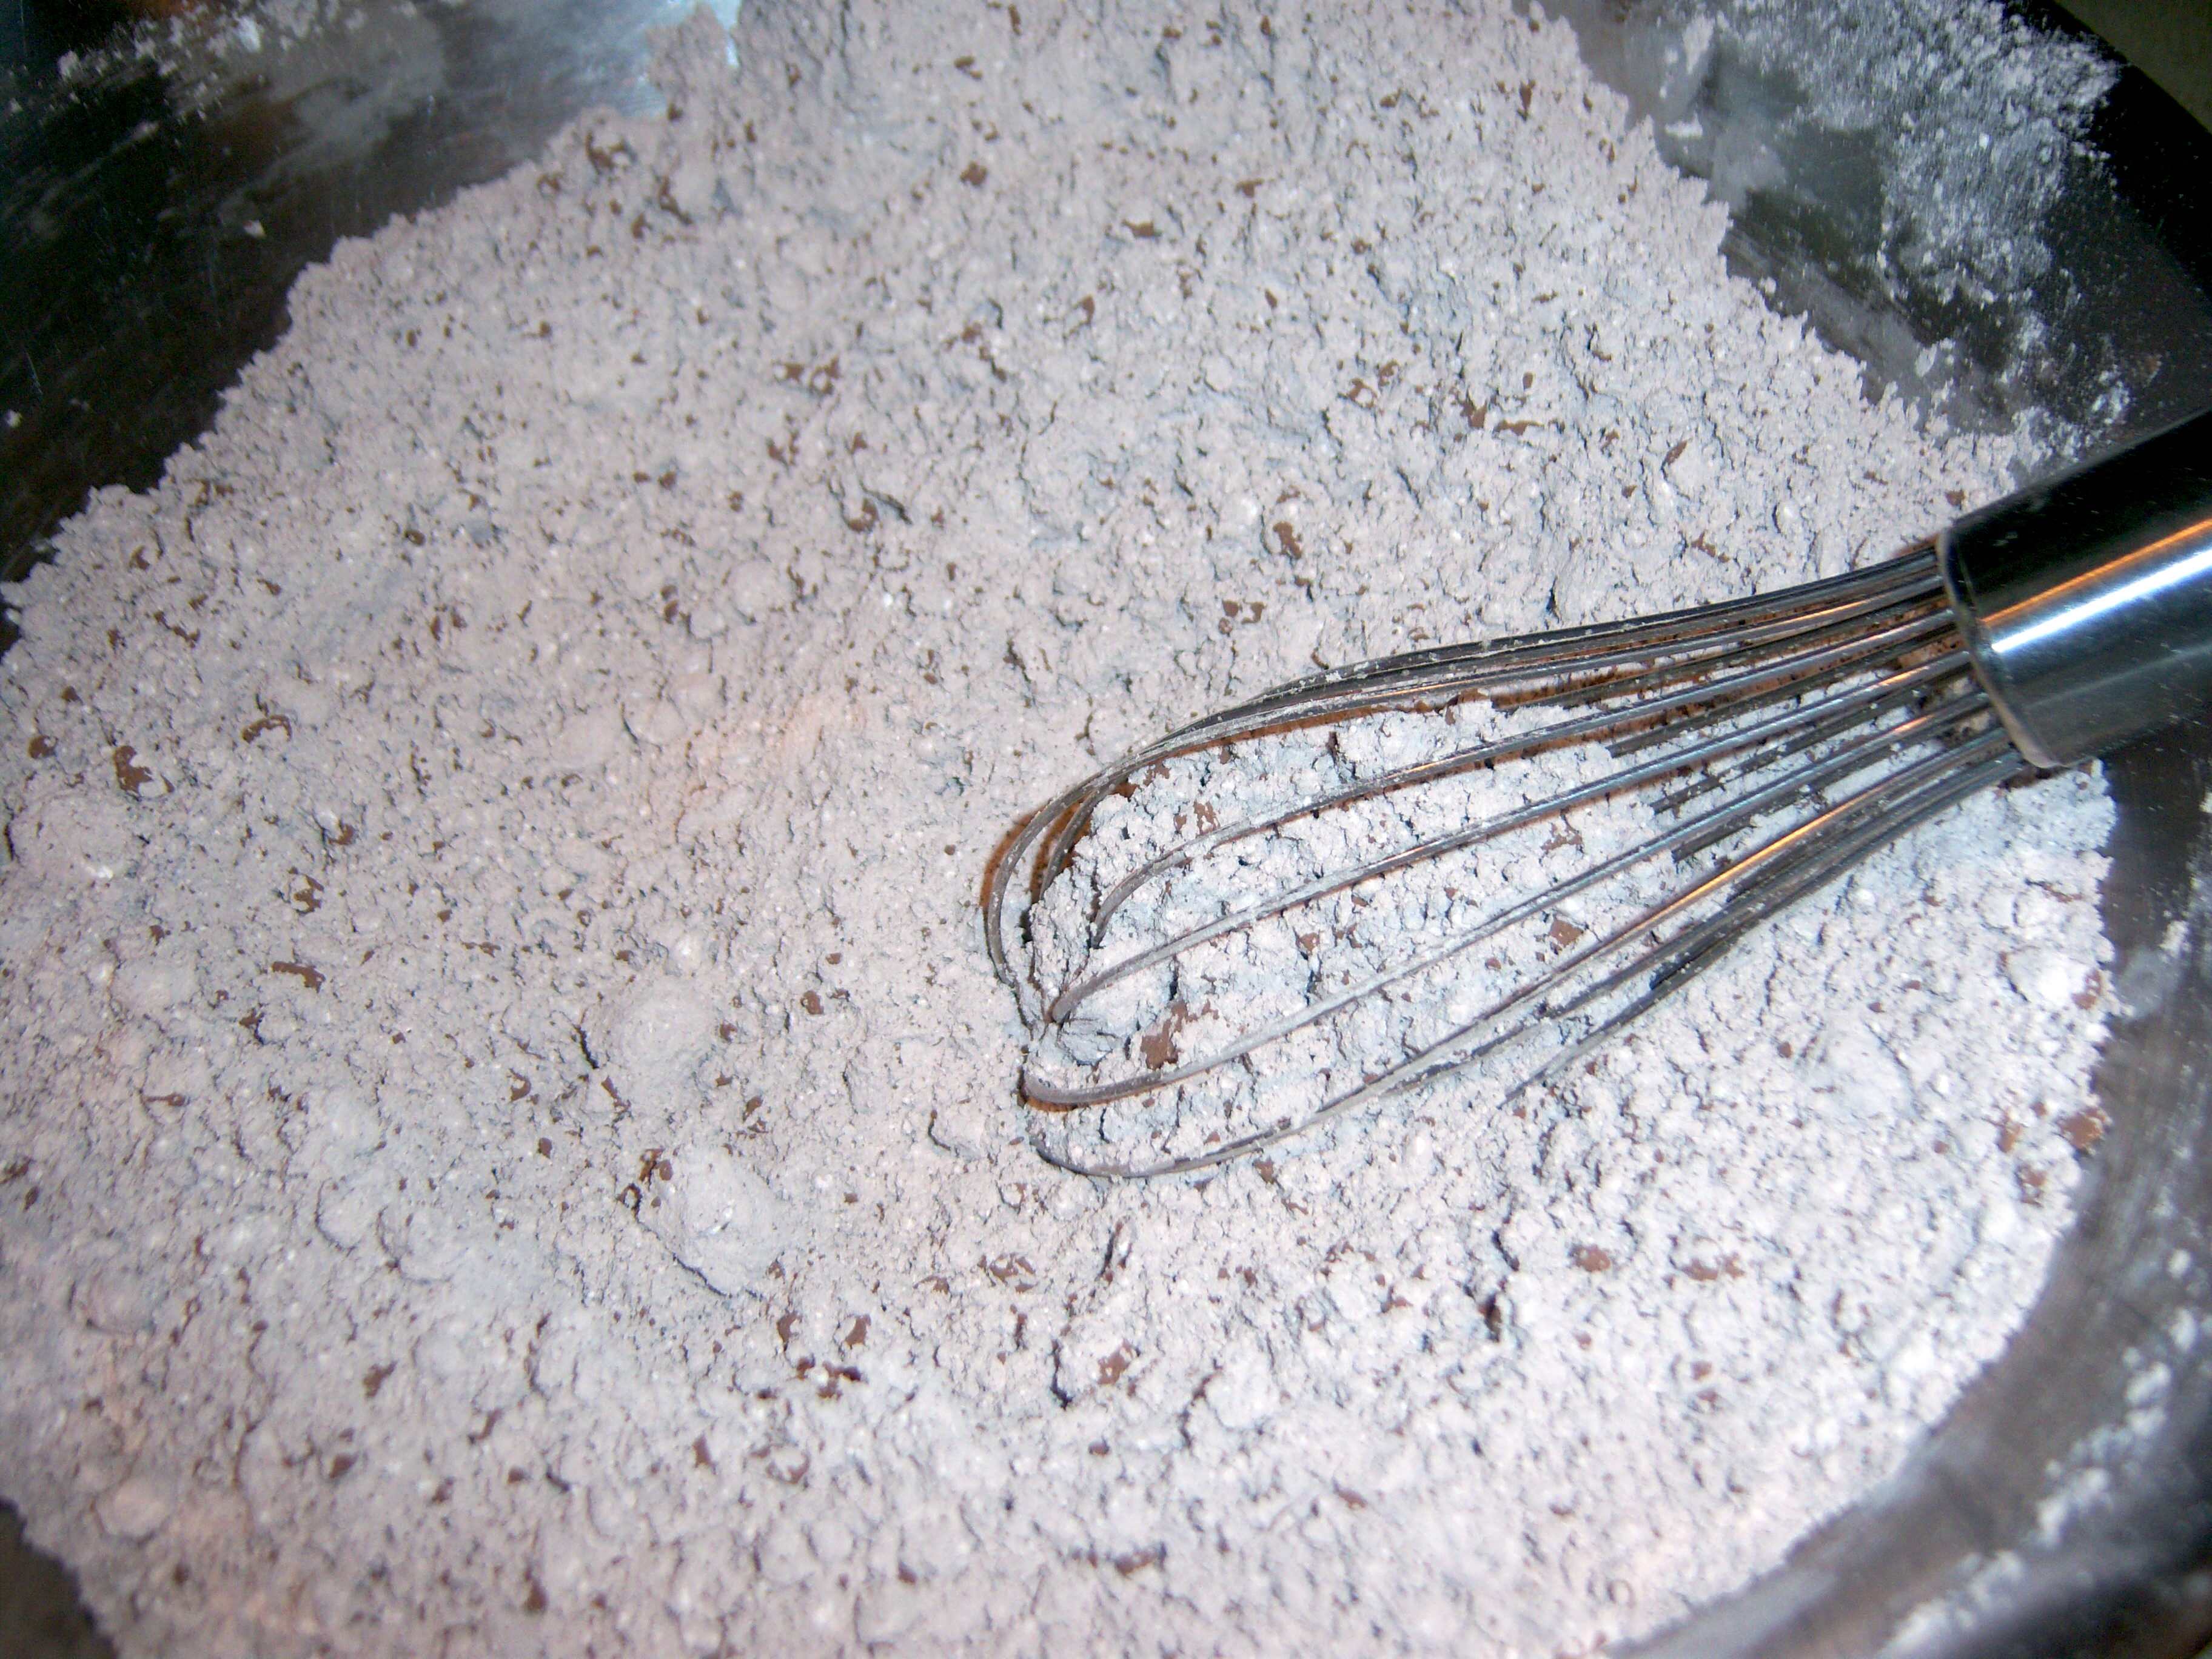 Whisking the dry ingredients